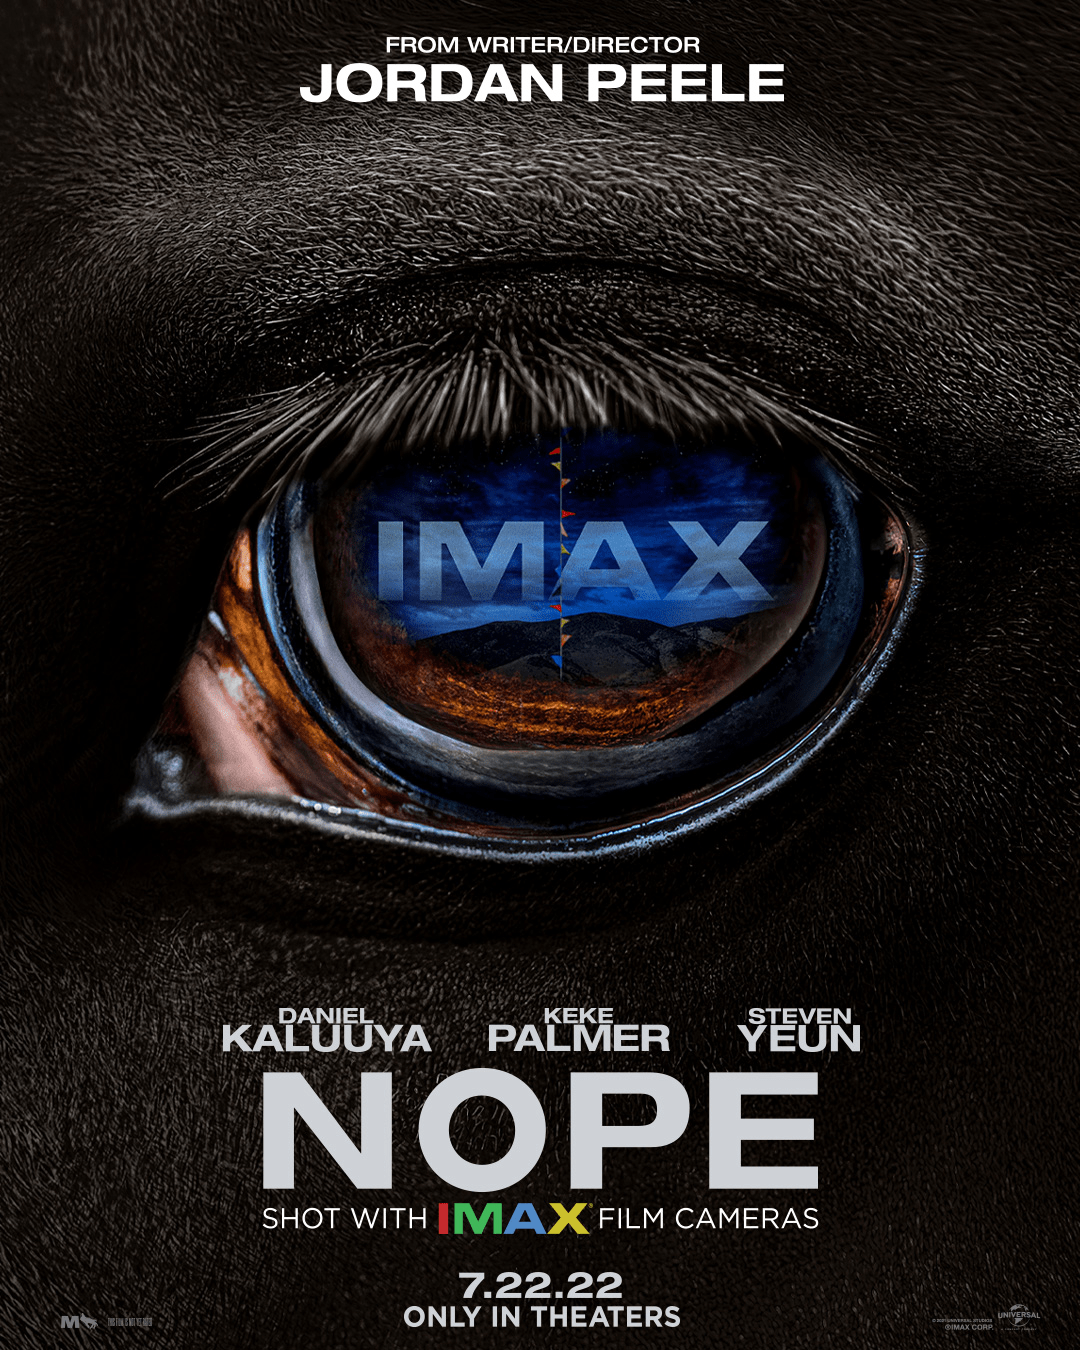 IMAX Poster for Jordan Peele's 'Nope' Has Got Its Eye on You